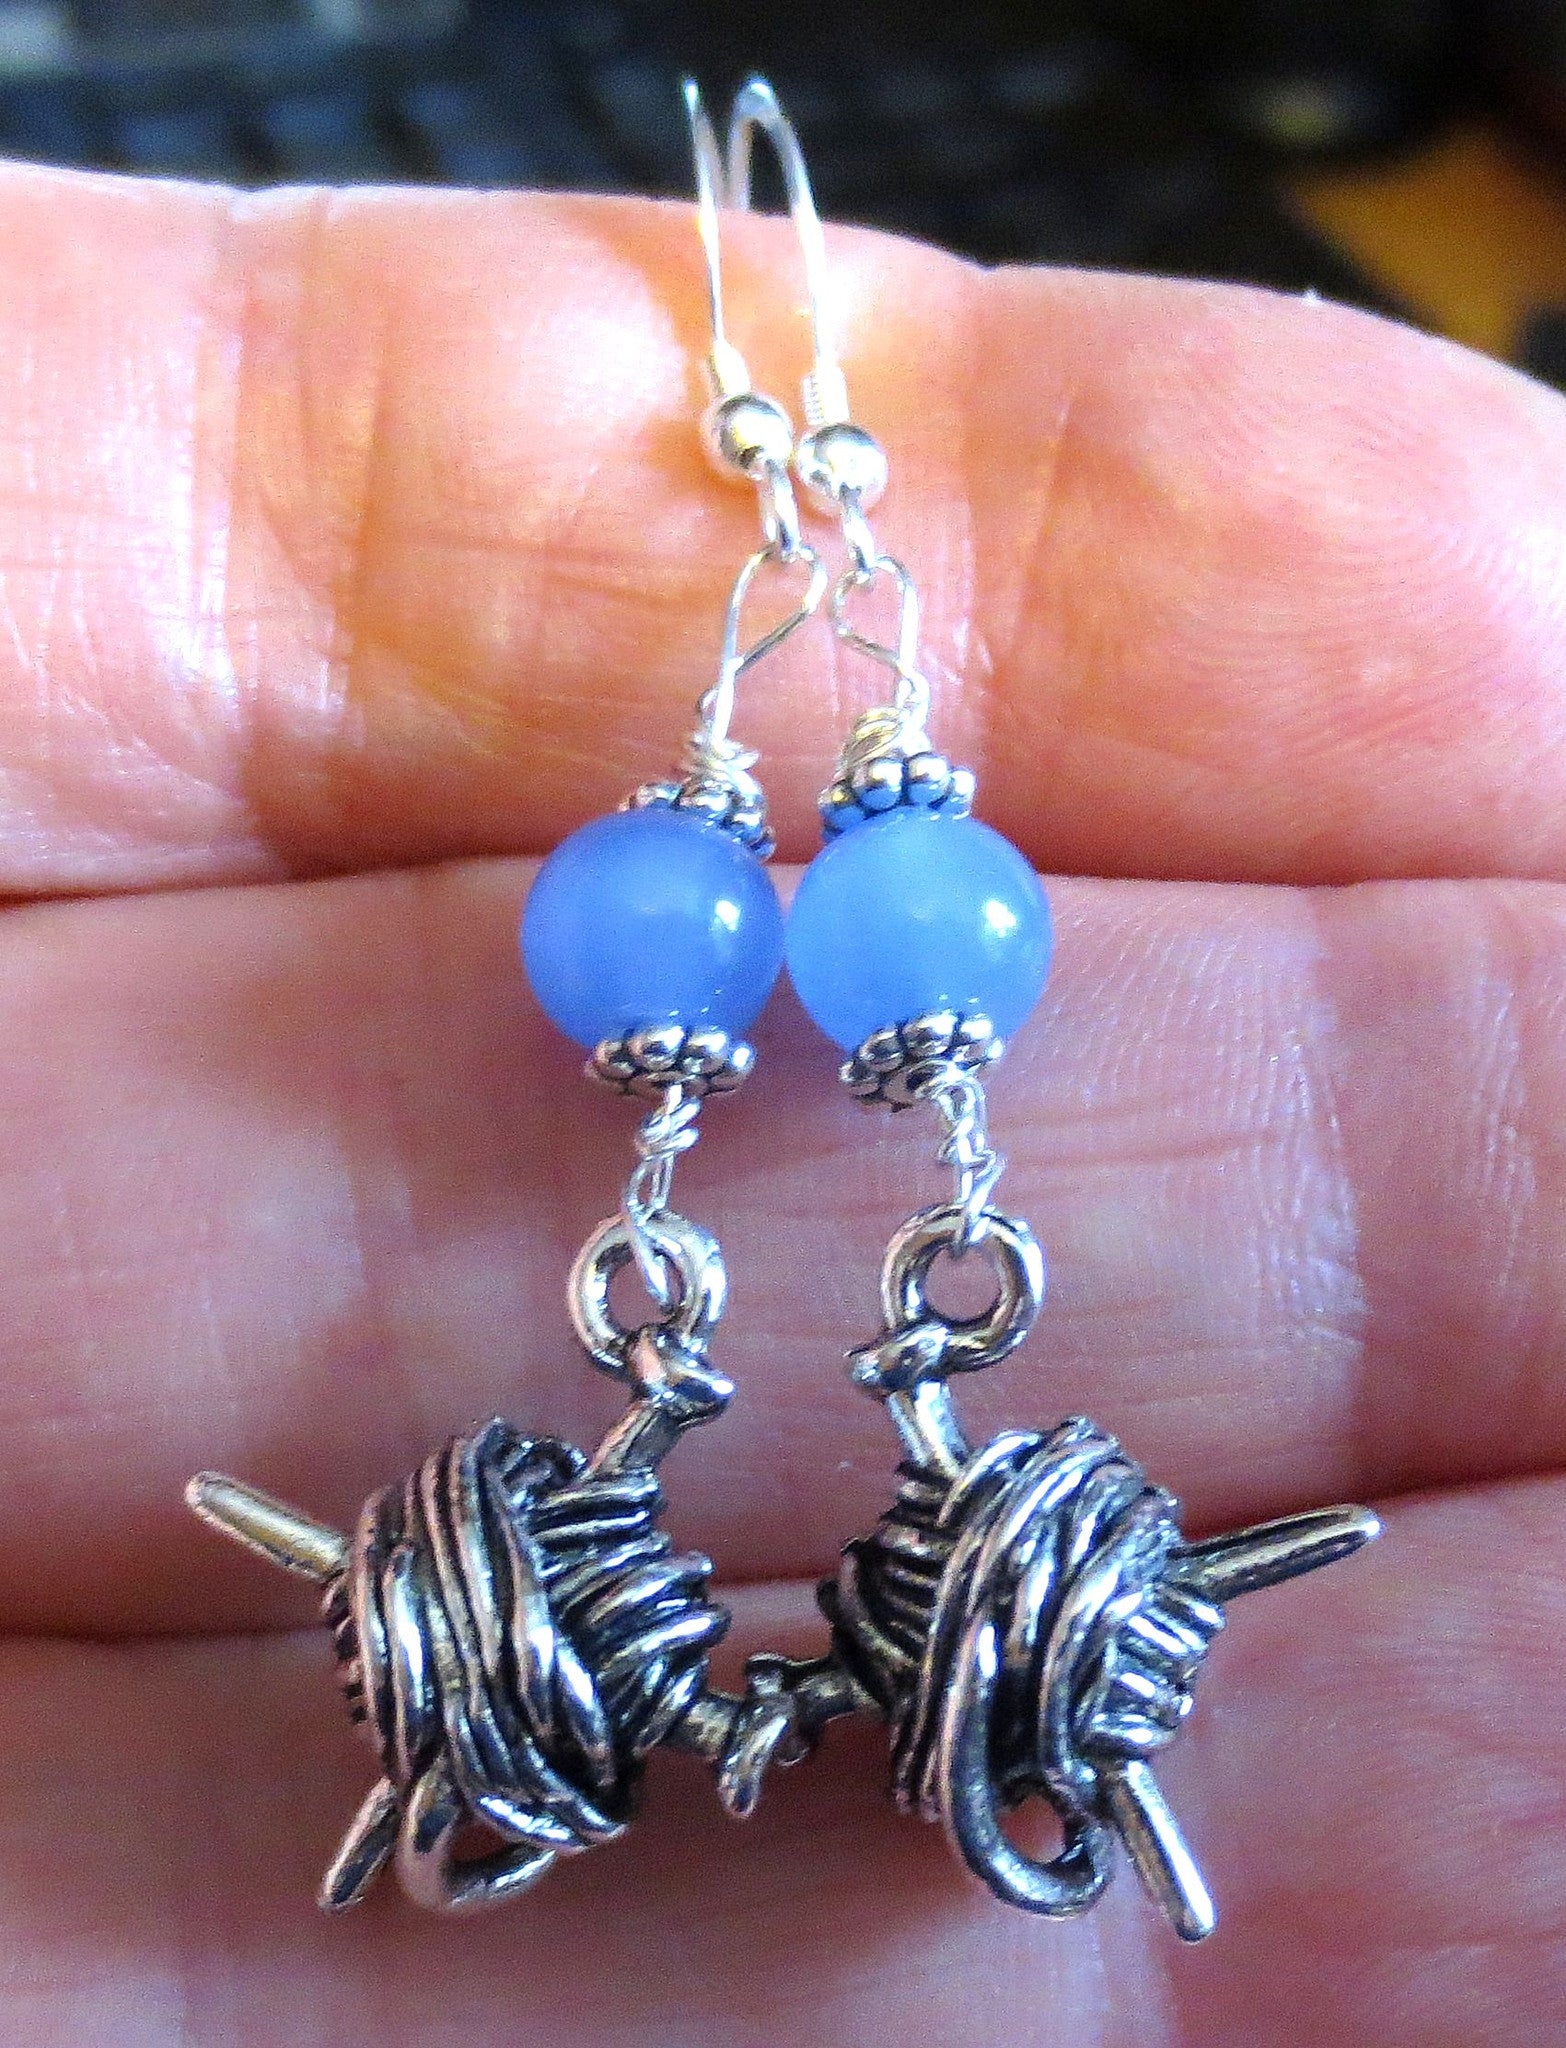 knitting theme silver earrings -- plain or with gemstones -- yarn with needles blueonyx / sterling silver wires / knitting charm